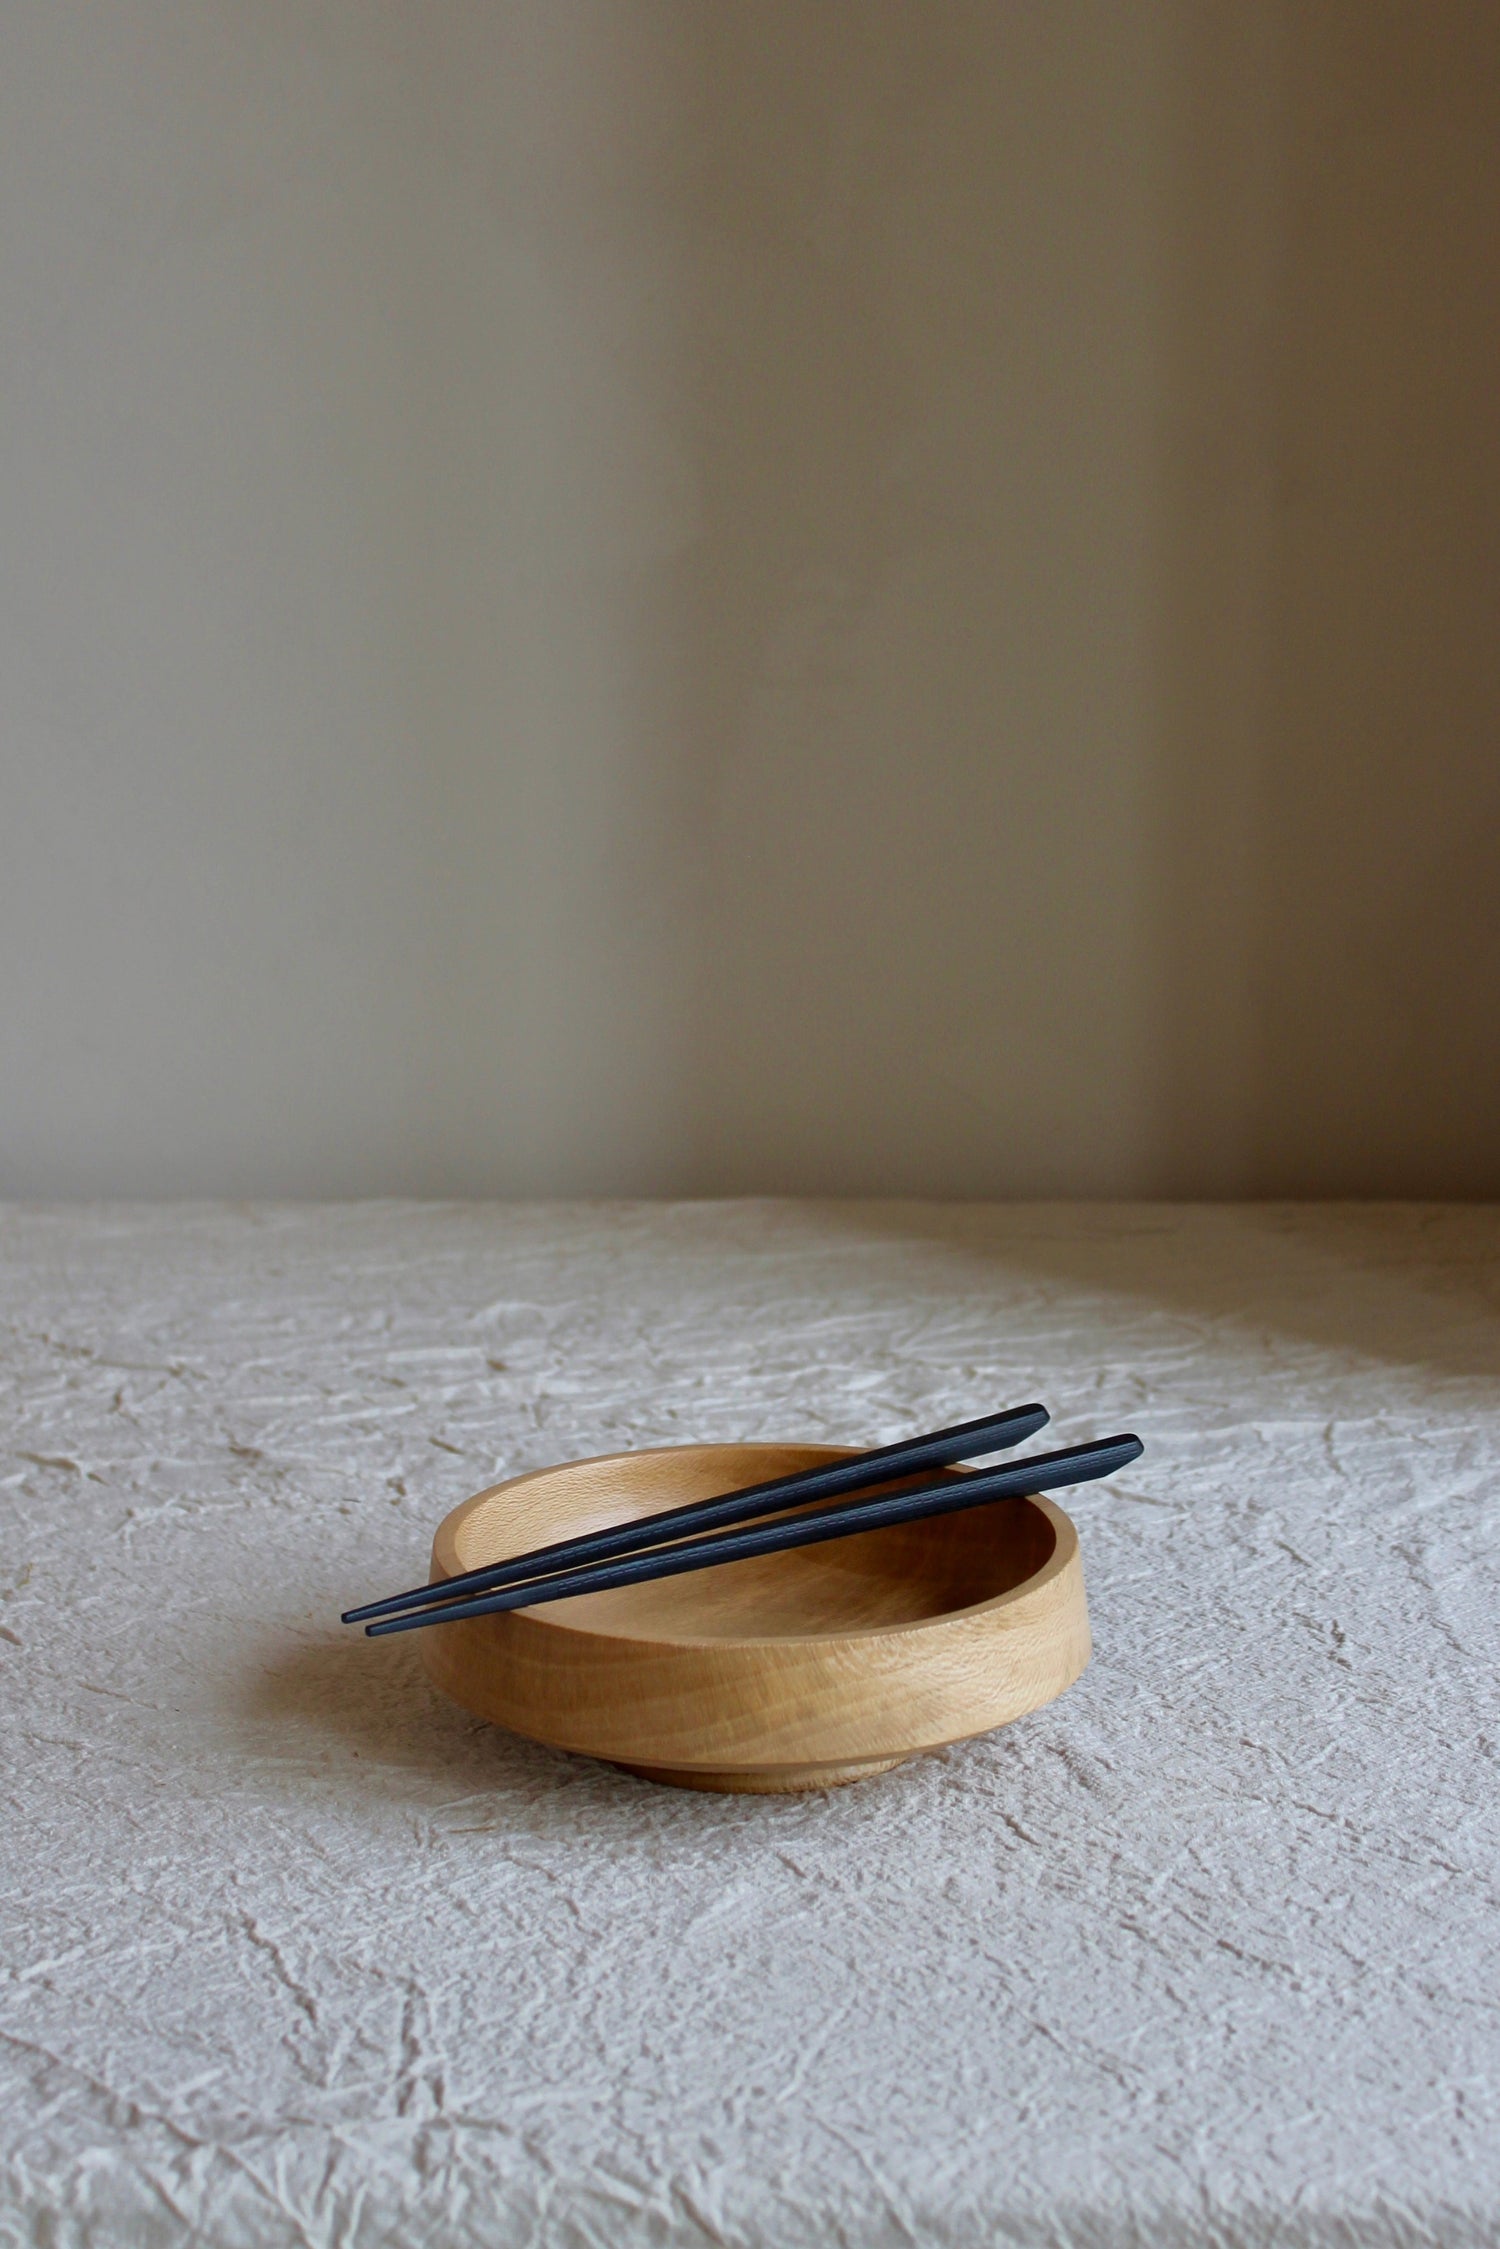 Little Bowl by Het Houtlokaal, a hand-turned wooden bowl made from sustainably sourced sycamore wood. It features a food-safe and water-repellent hard wax finish, making it suitable for both warm and cold nibbles.